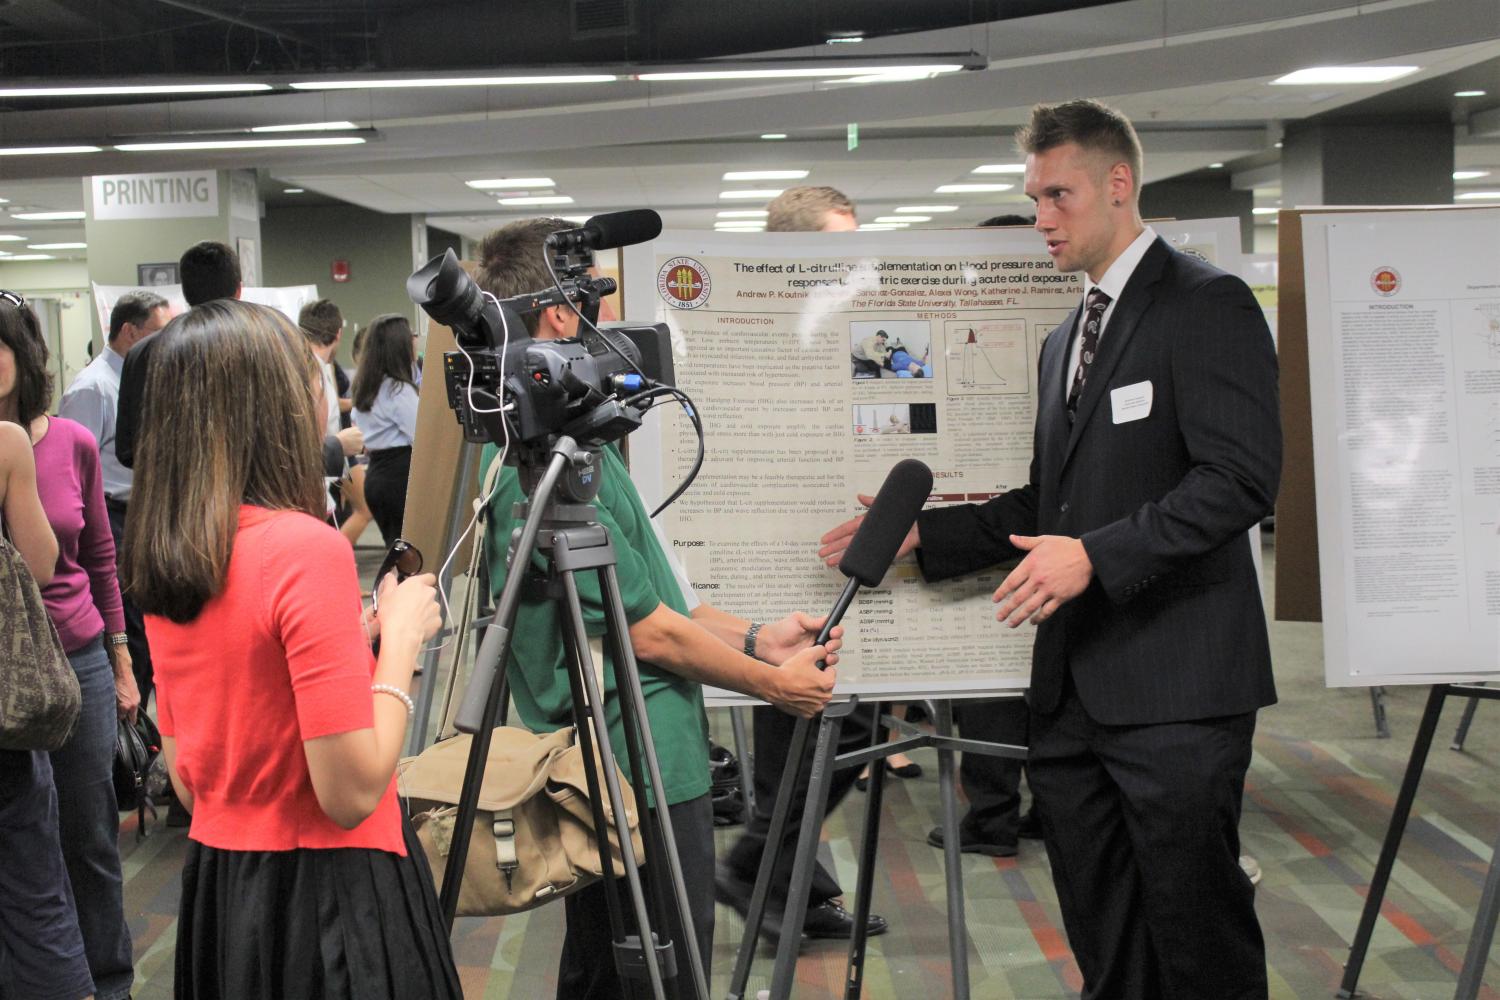 A student wearing a black suit is interviewed about his research presentation by a news crew. One person holds the microphone while another controls a camcorder. The student is surrounded by event guests.